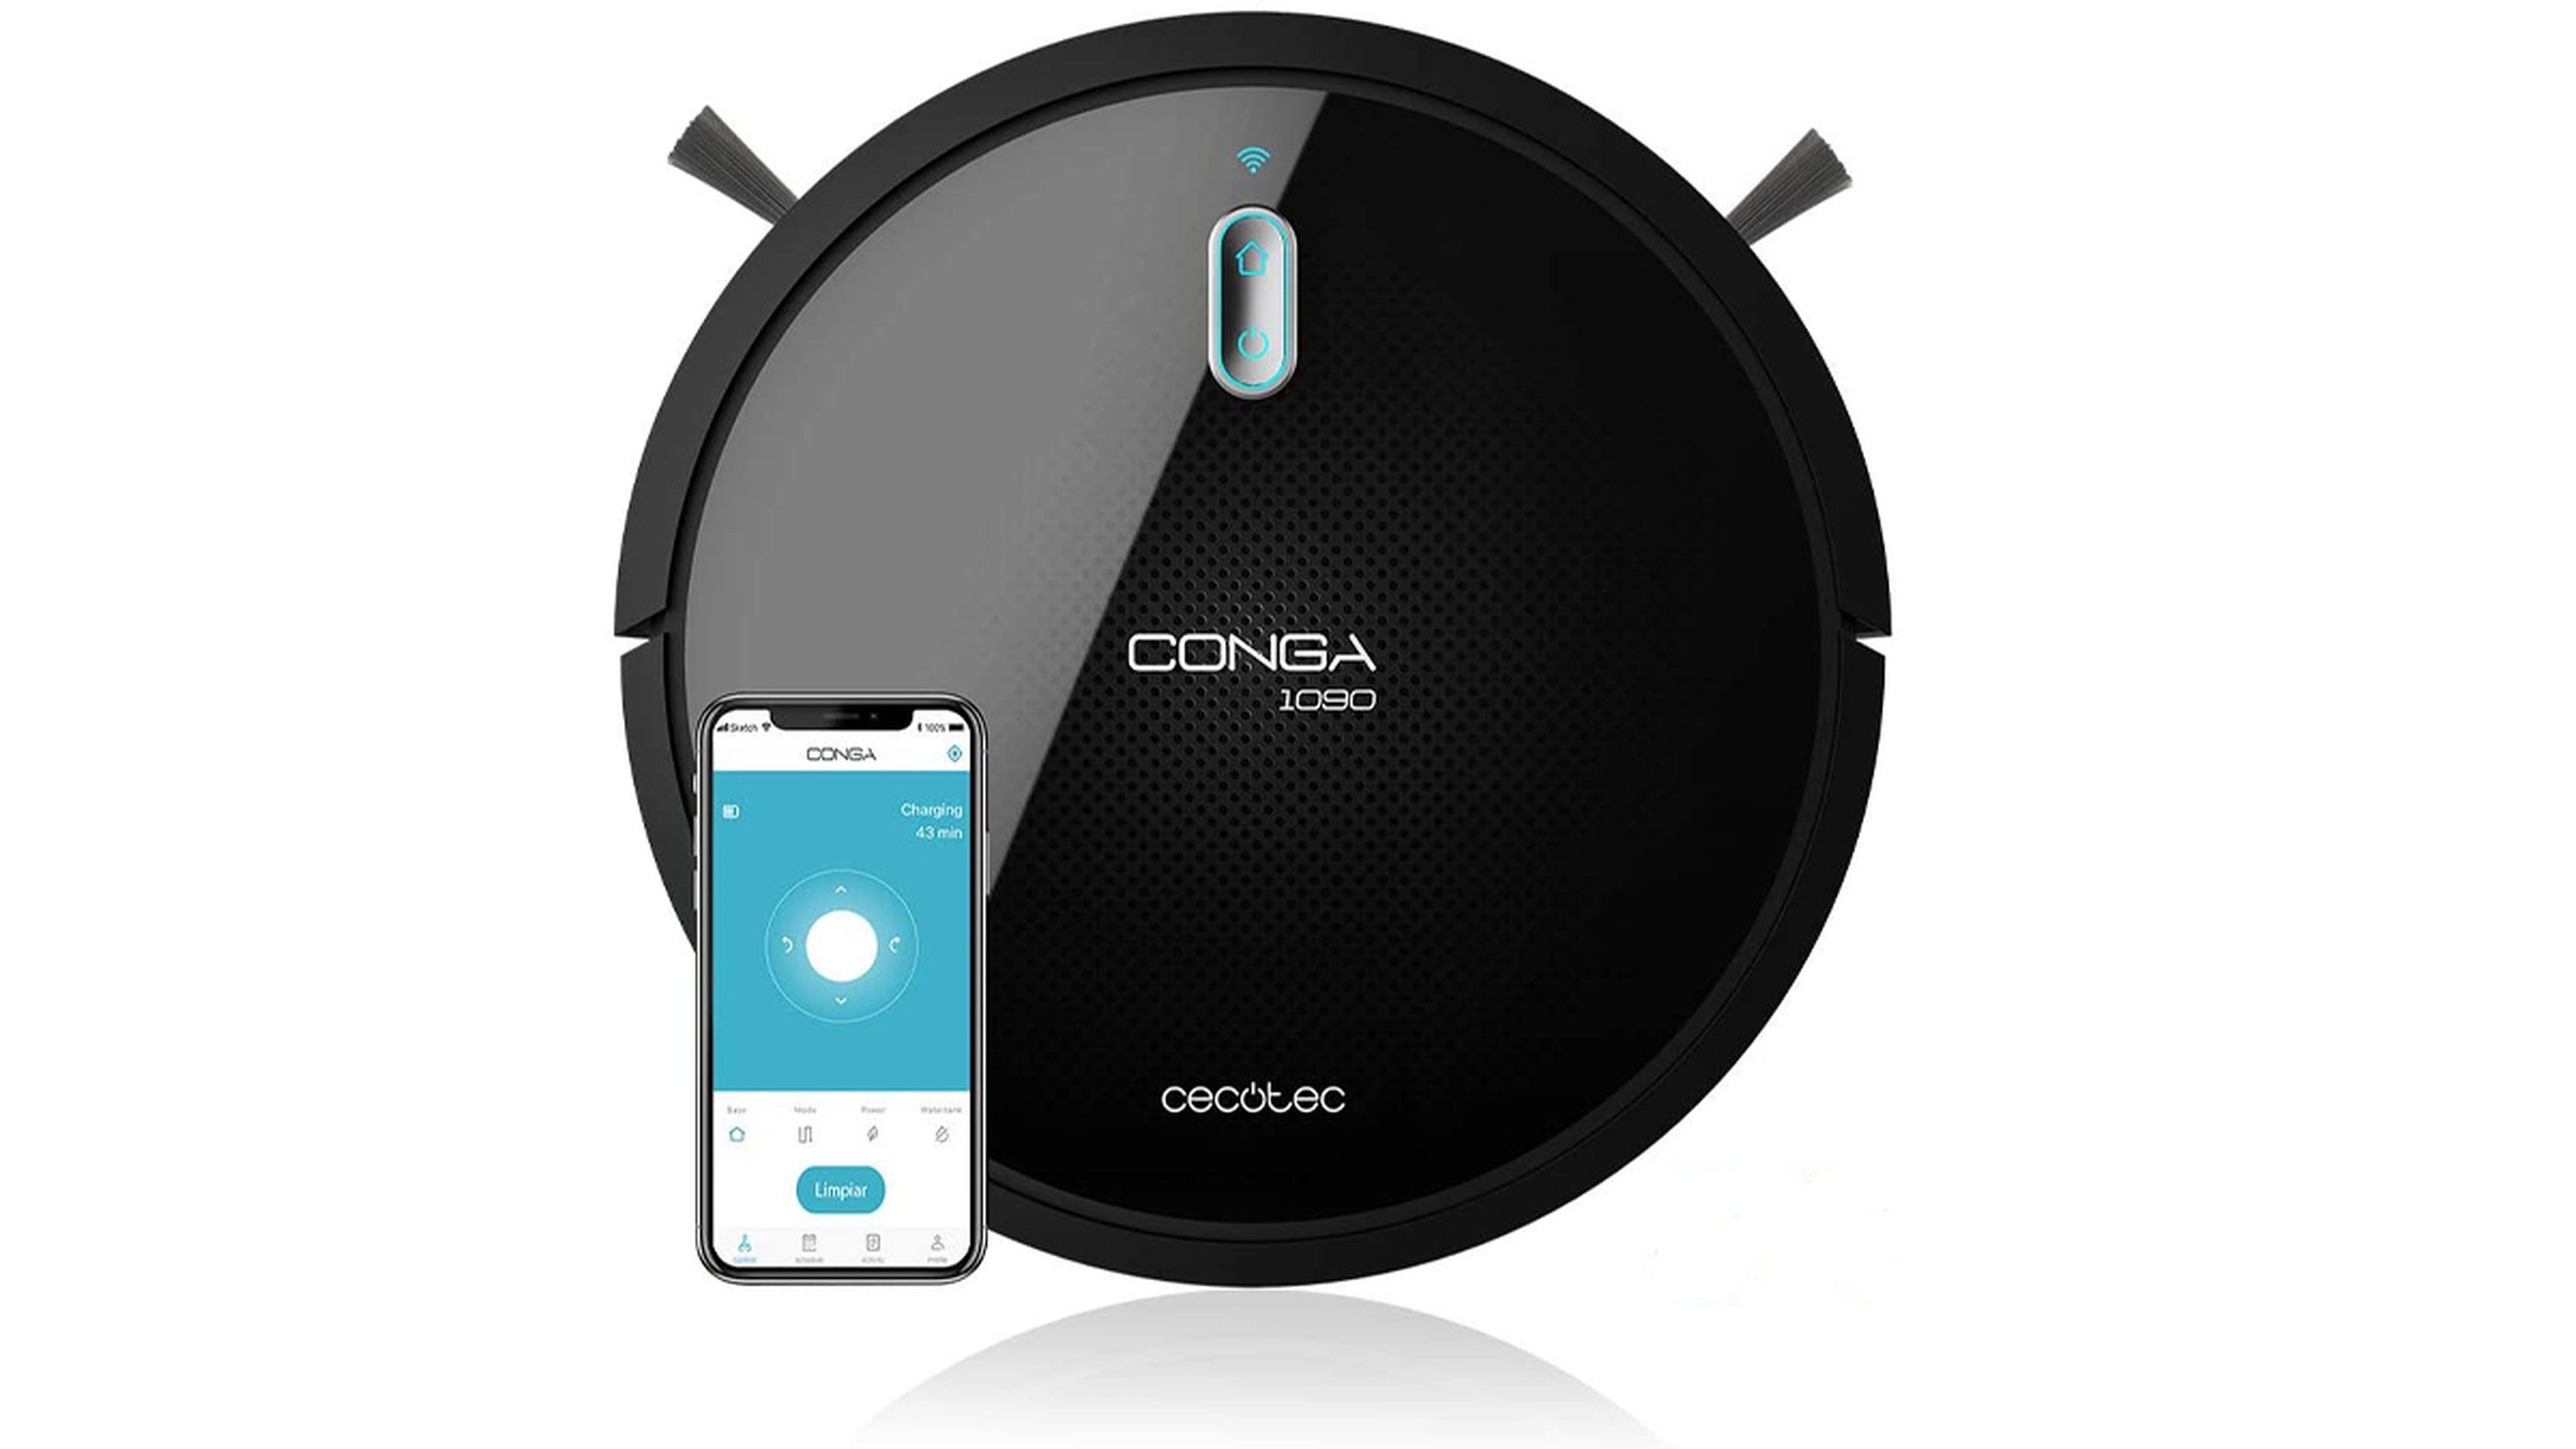 Cecotec Conga 1090 Connected Force